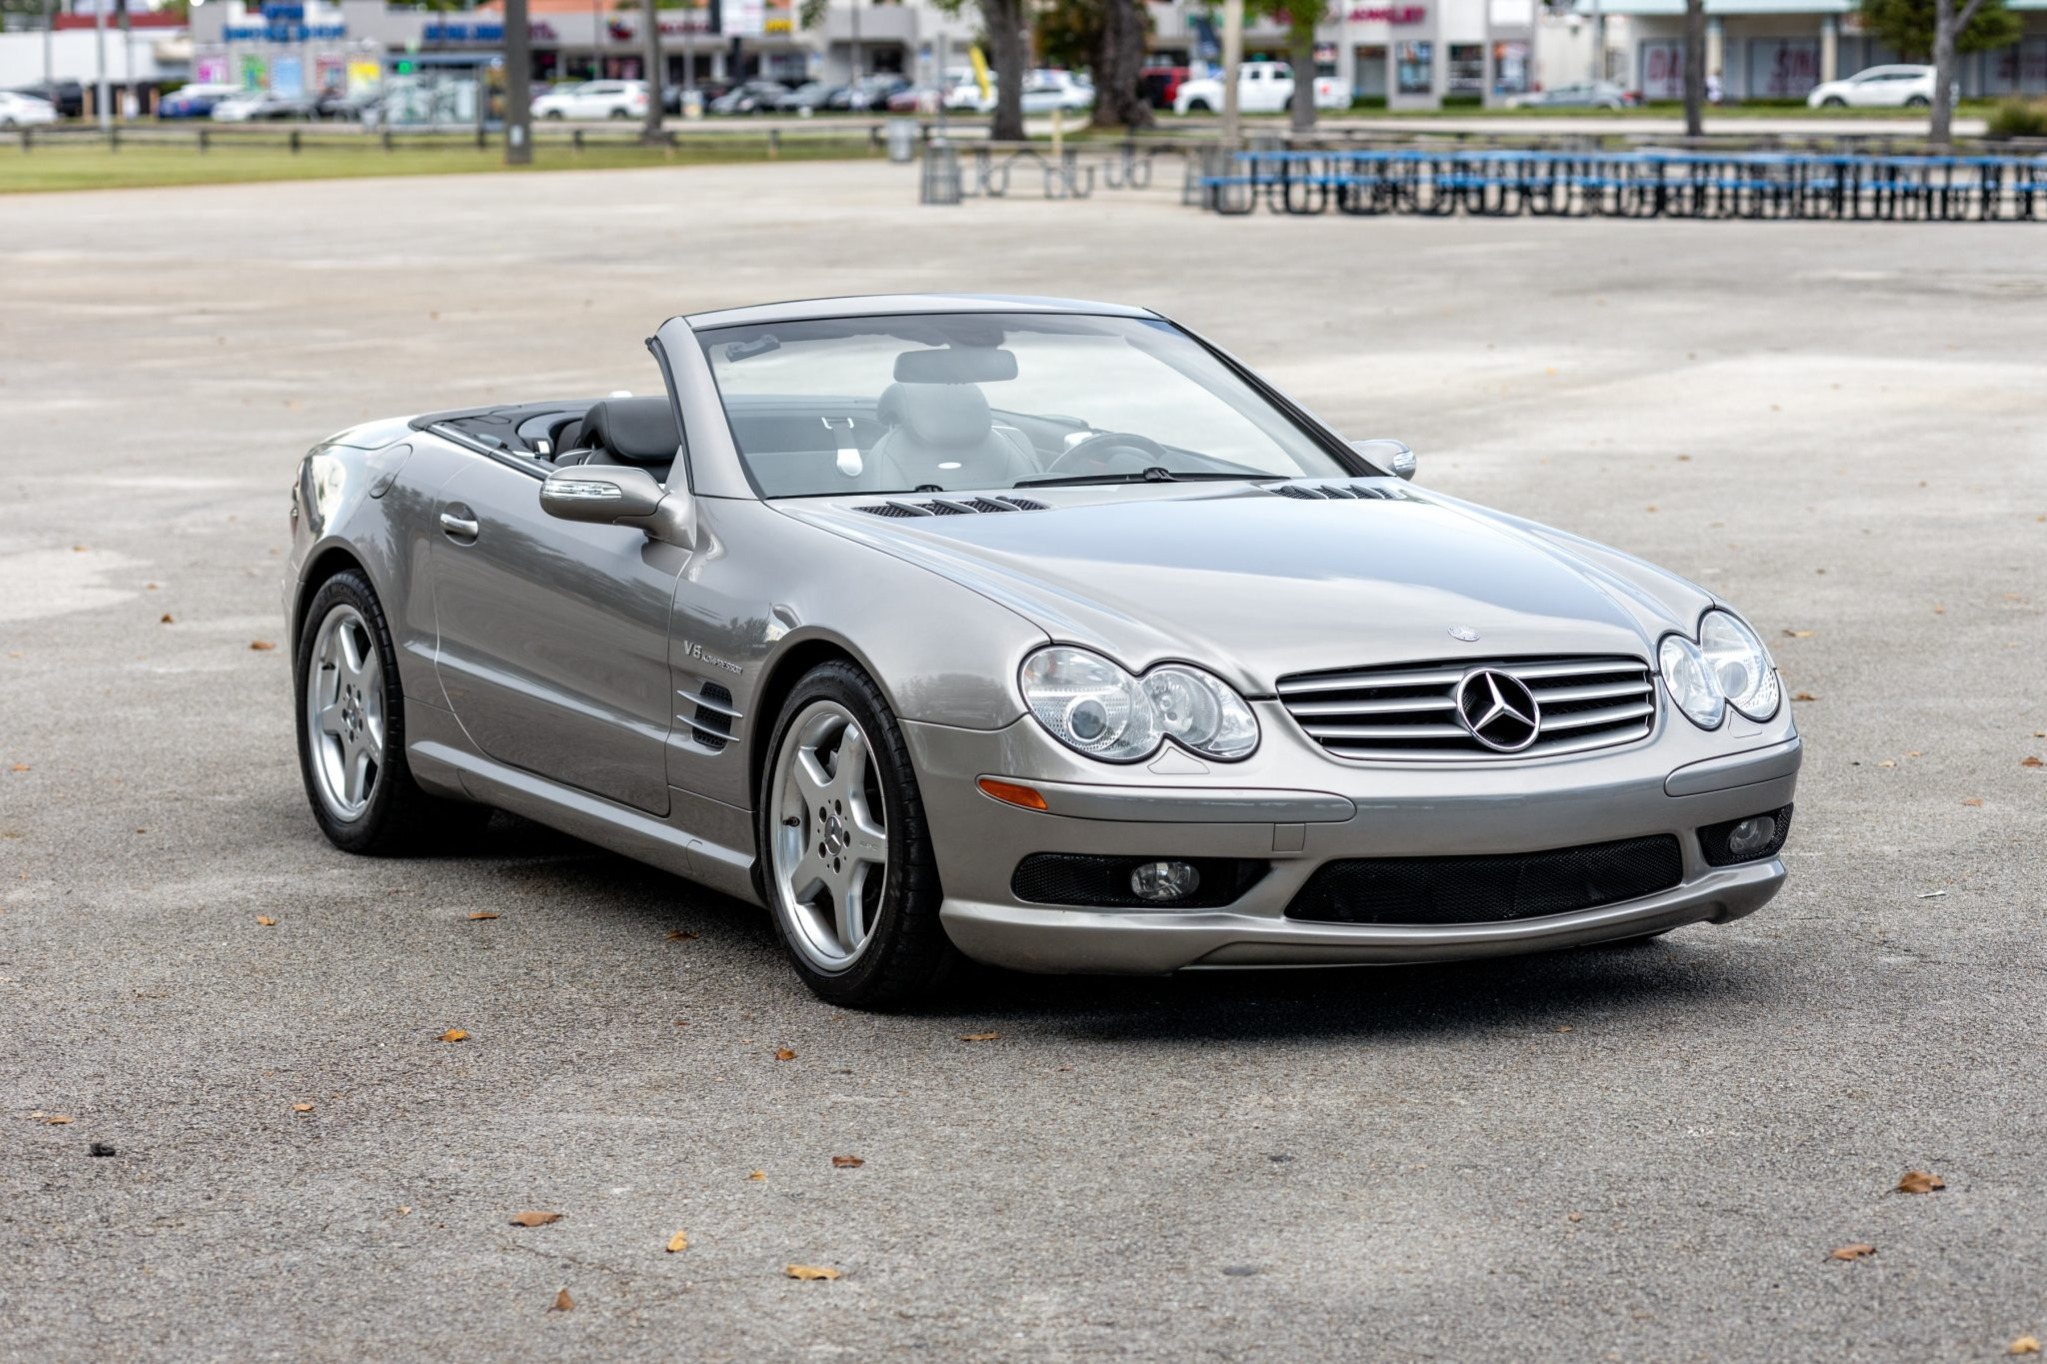 Used 45k-Mile 2004 Mercedes-Benz SL55 AMG Review